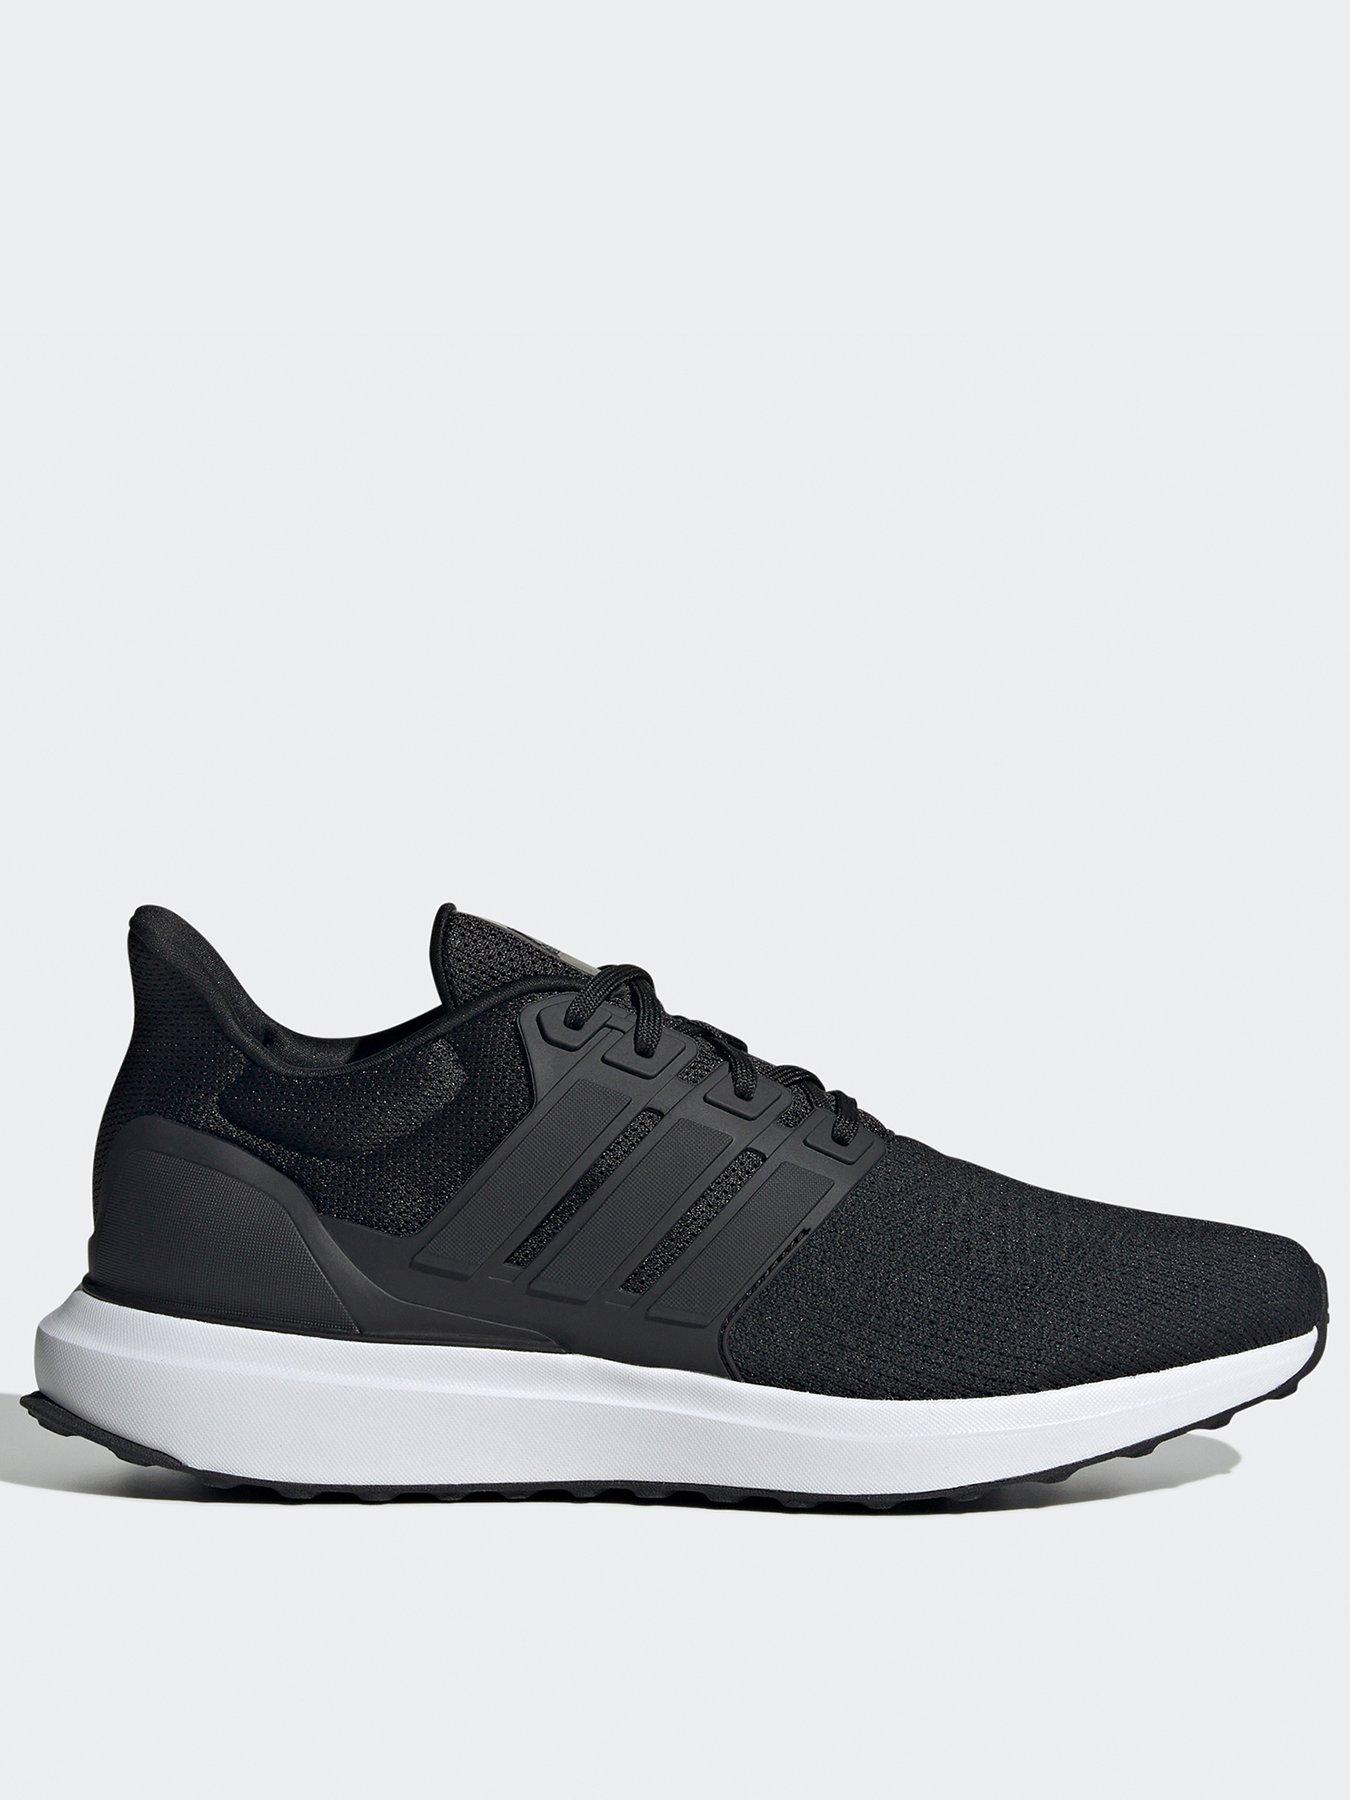 adidas Sportswear Mens Ultrabounce DNA Trainers - Black/White | very.co.uk